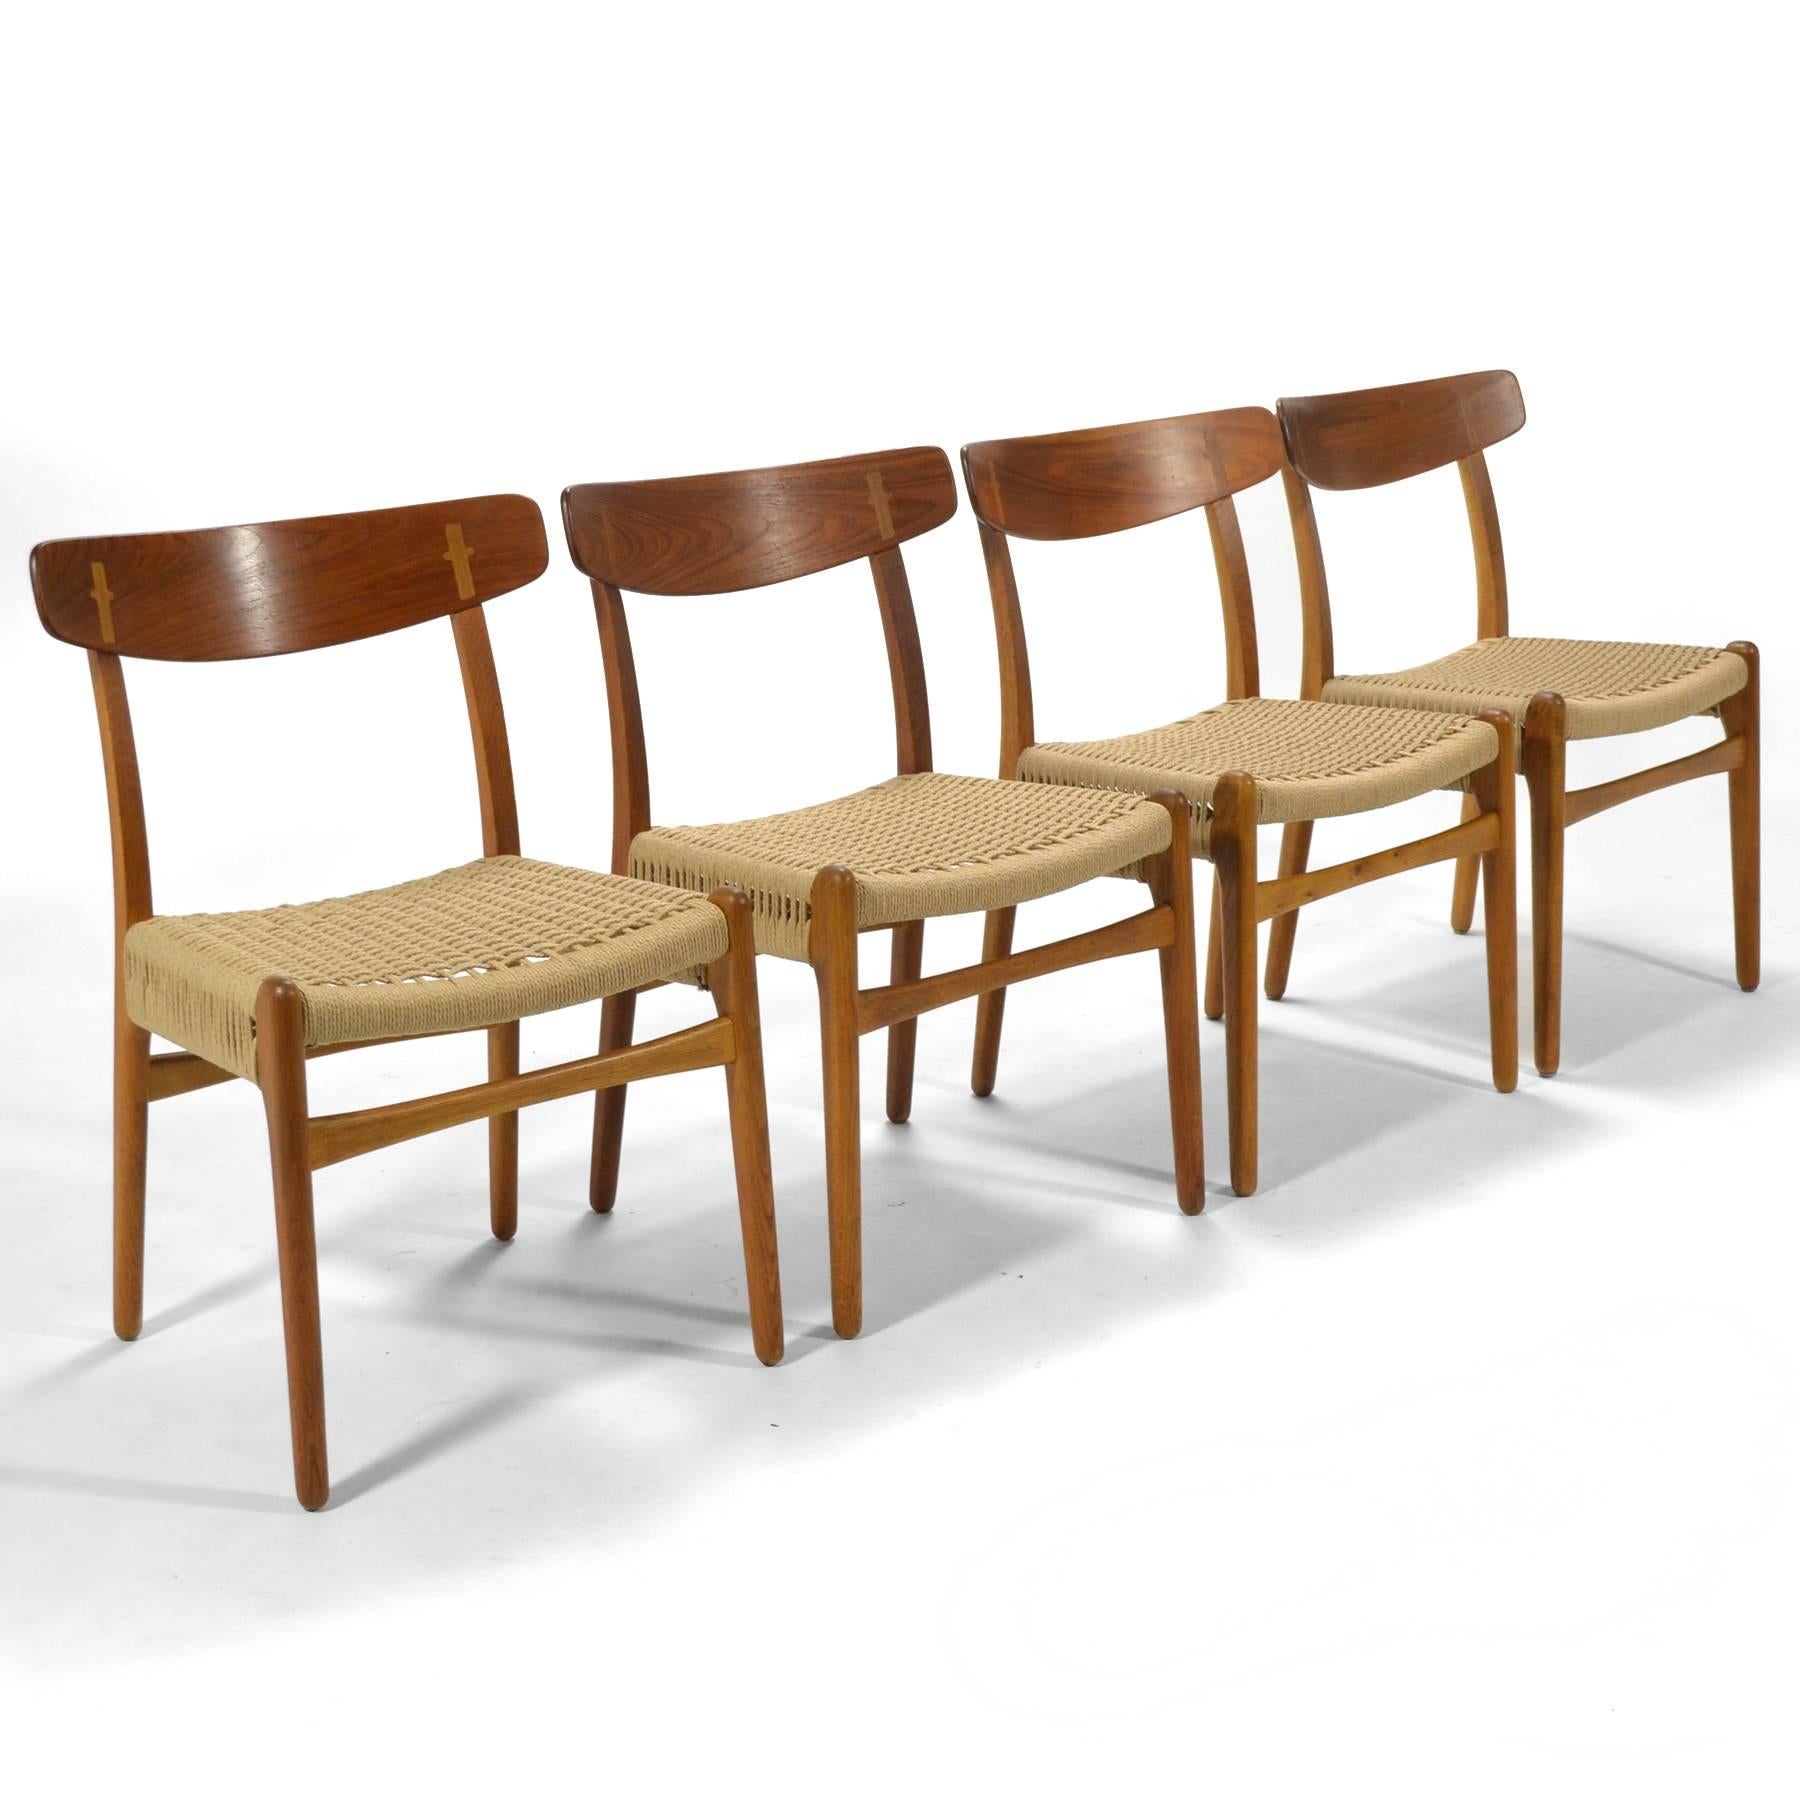 This handsome set of four Hans Wegner CH23 chairs were expertly crafted by Carl Hansen & Søn. The feature oak frames with teak backrests and papercord seats. They are in excellent condition, the frames have been cleaned retaining their original